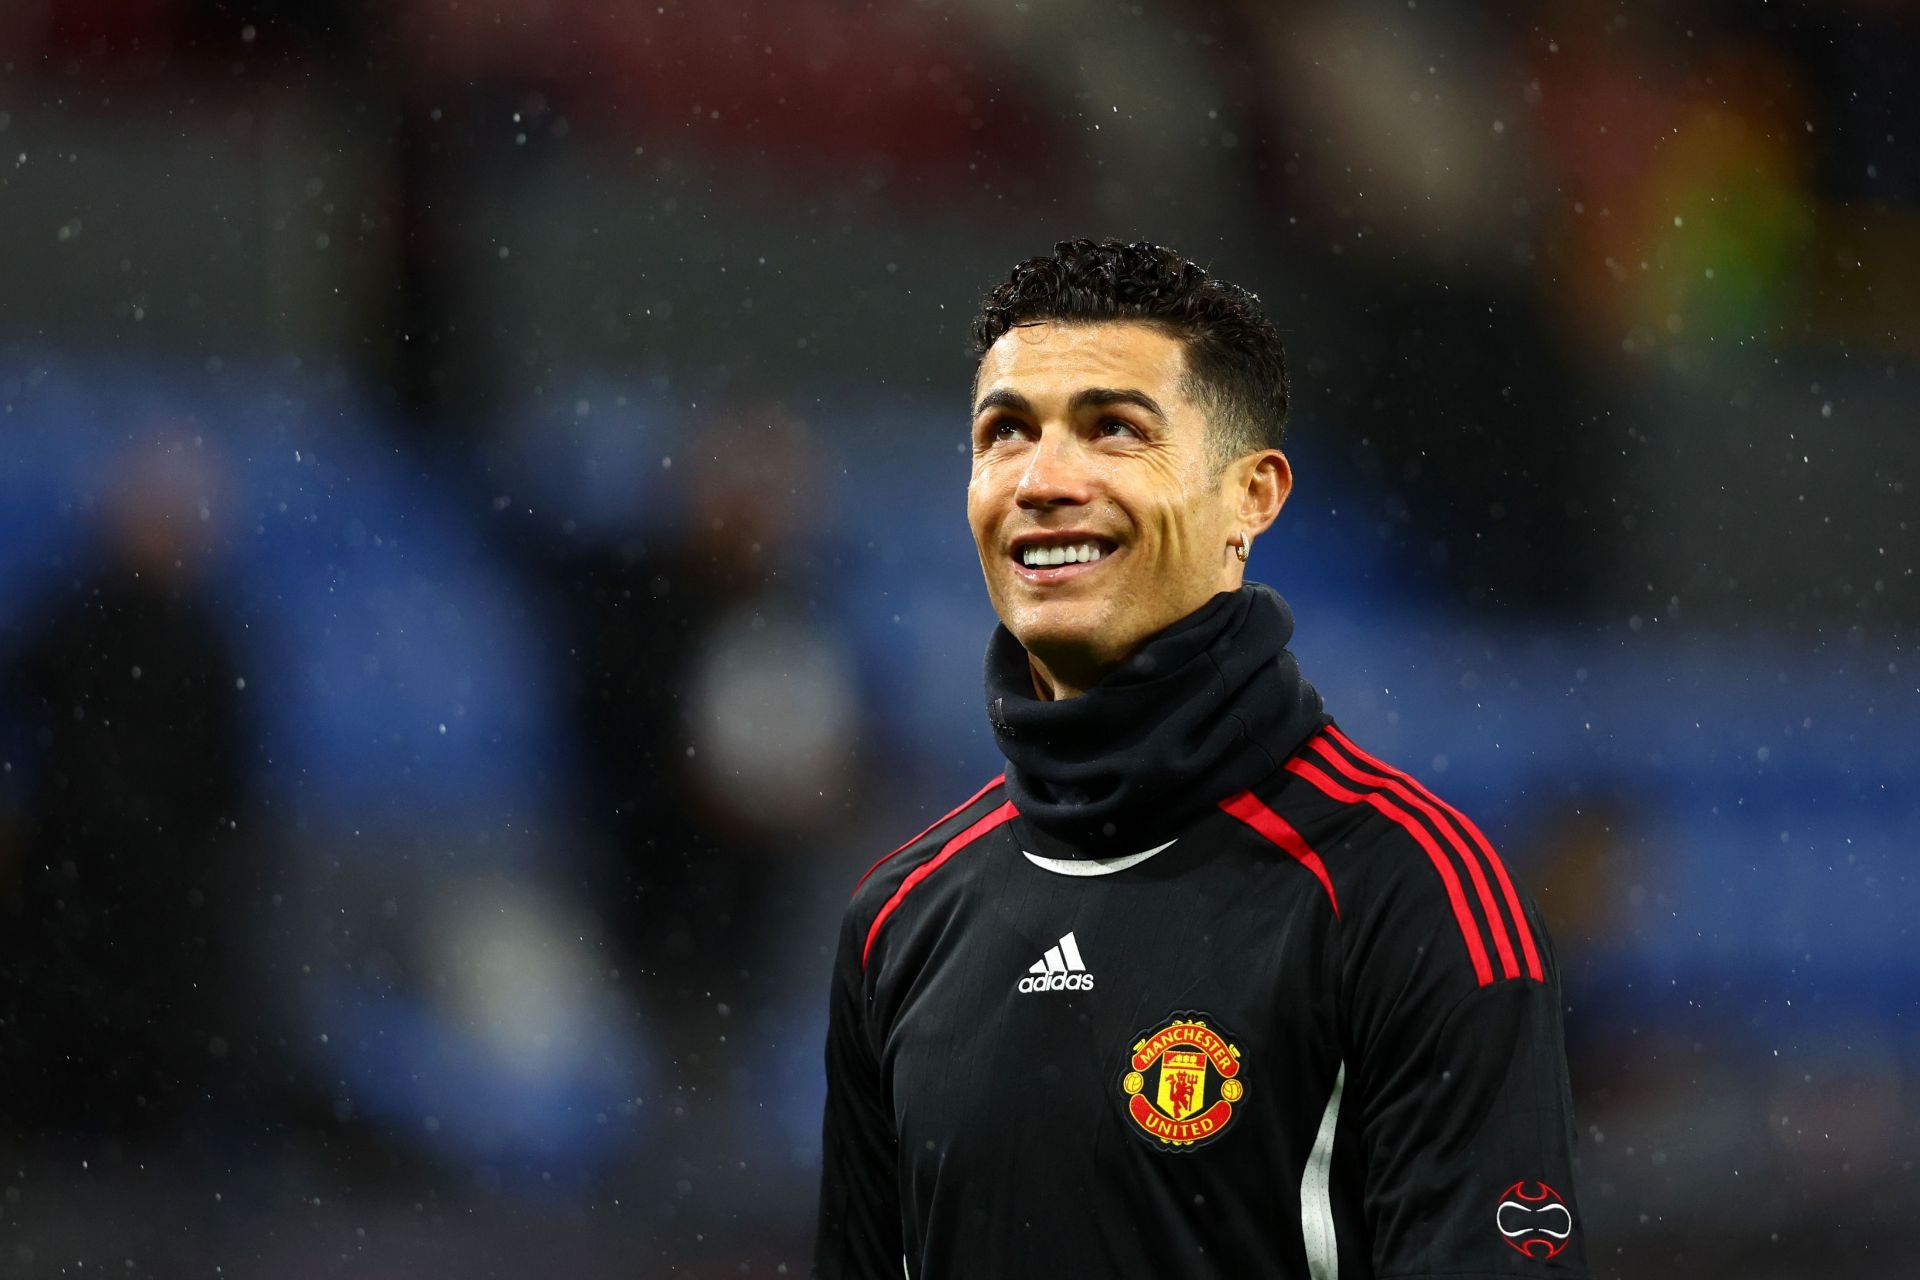 The Portuguese joined the Red Devils for the second time last summer